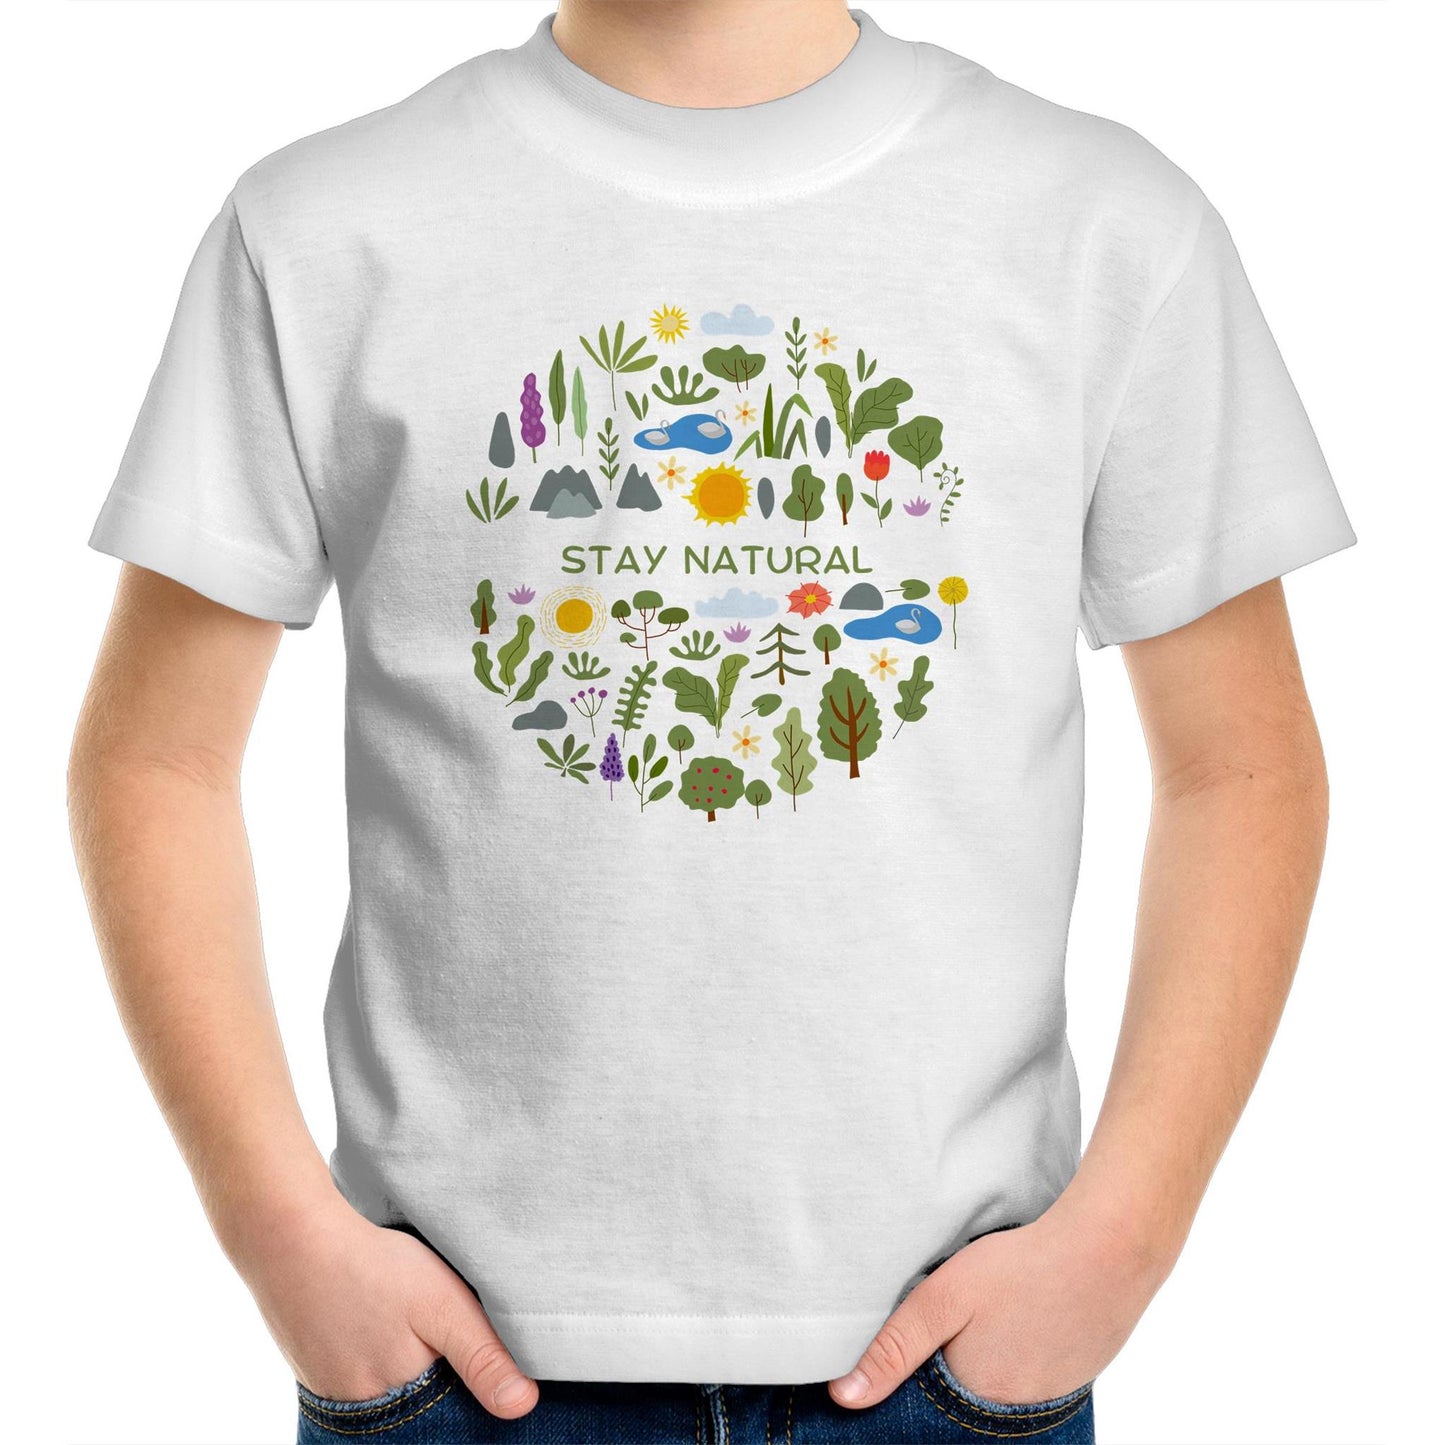 Stay Natural - Kids Youth Crew T-Shirt White Kids Youth T-shirt Environment Plants